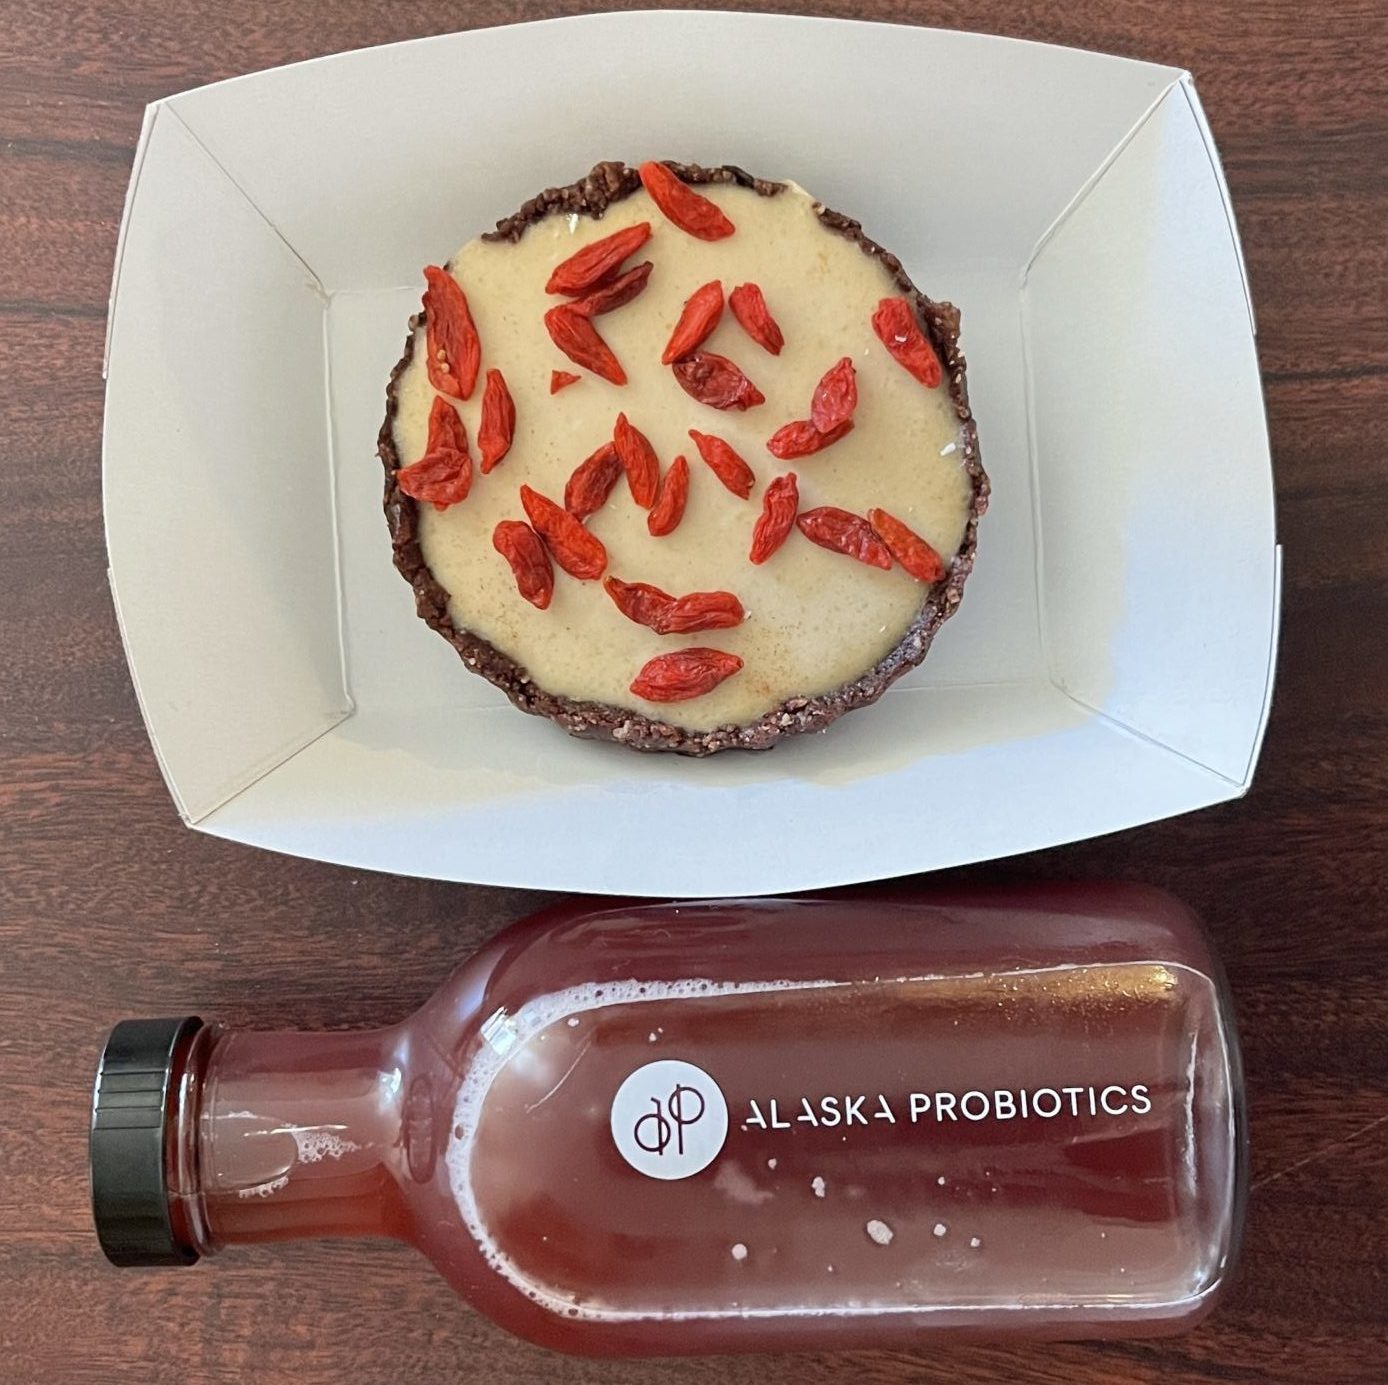 A bottle of kombucha from Alaska Probiotics and a vegan berry tart in a to-go container